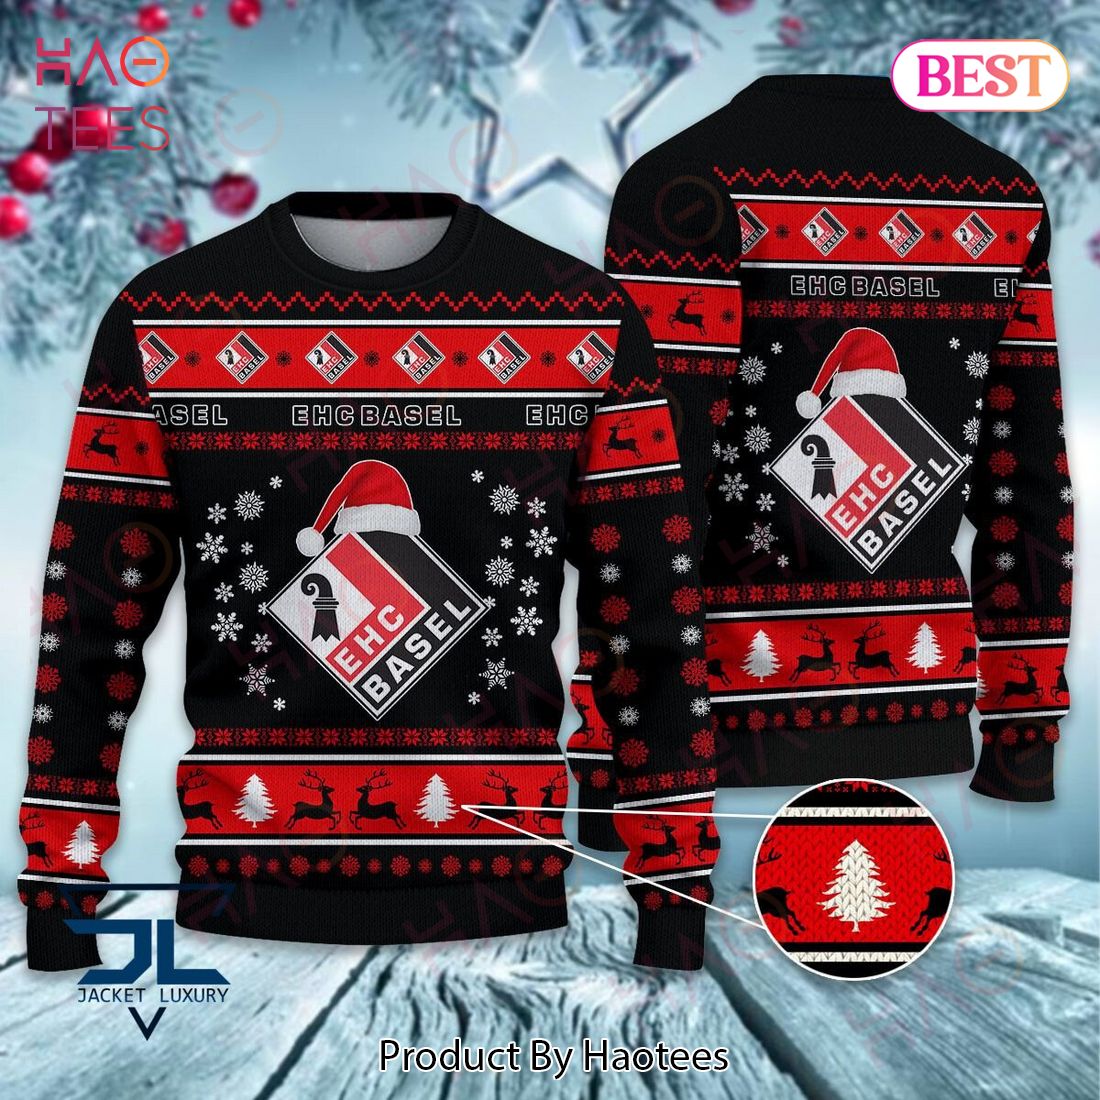 HOT EHC Basel Black Mix Red Christmas Luxury Brand Sweater Limited Edition